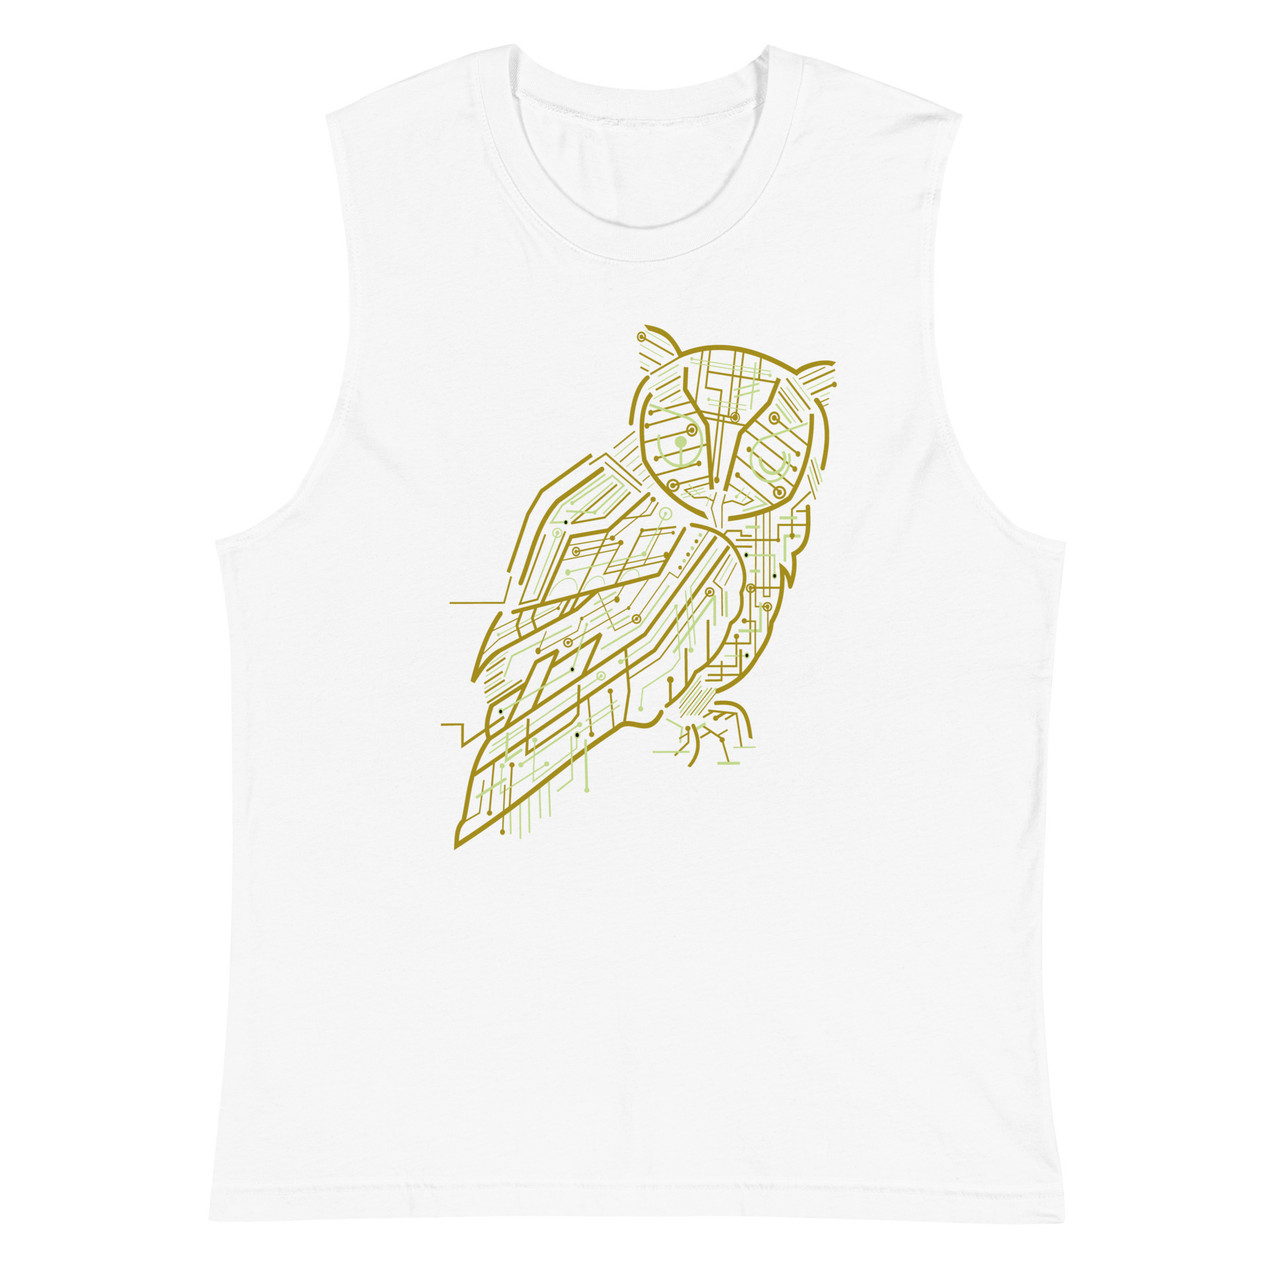 Electric Owl Unisex Muscle Shirt - Bella + Canvas 3483 